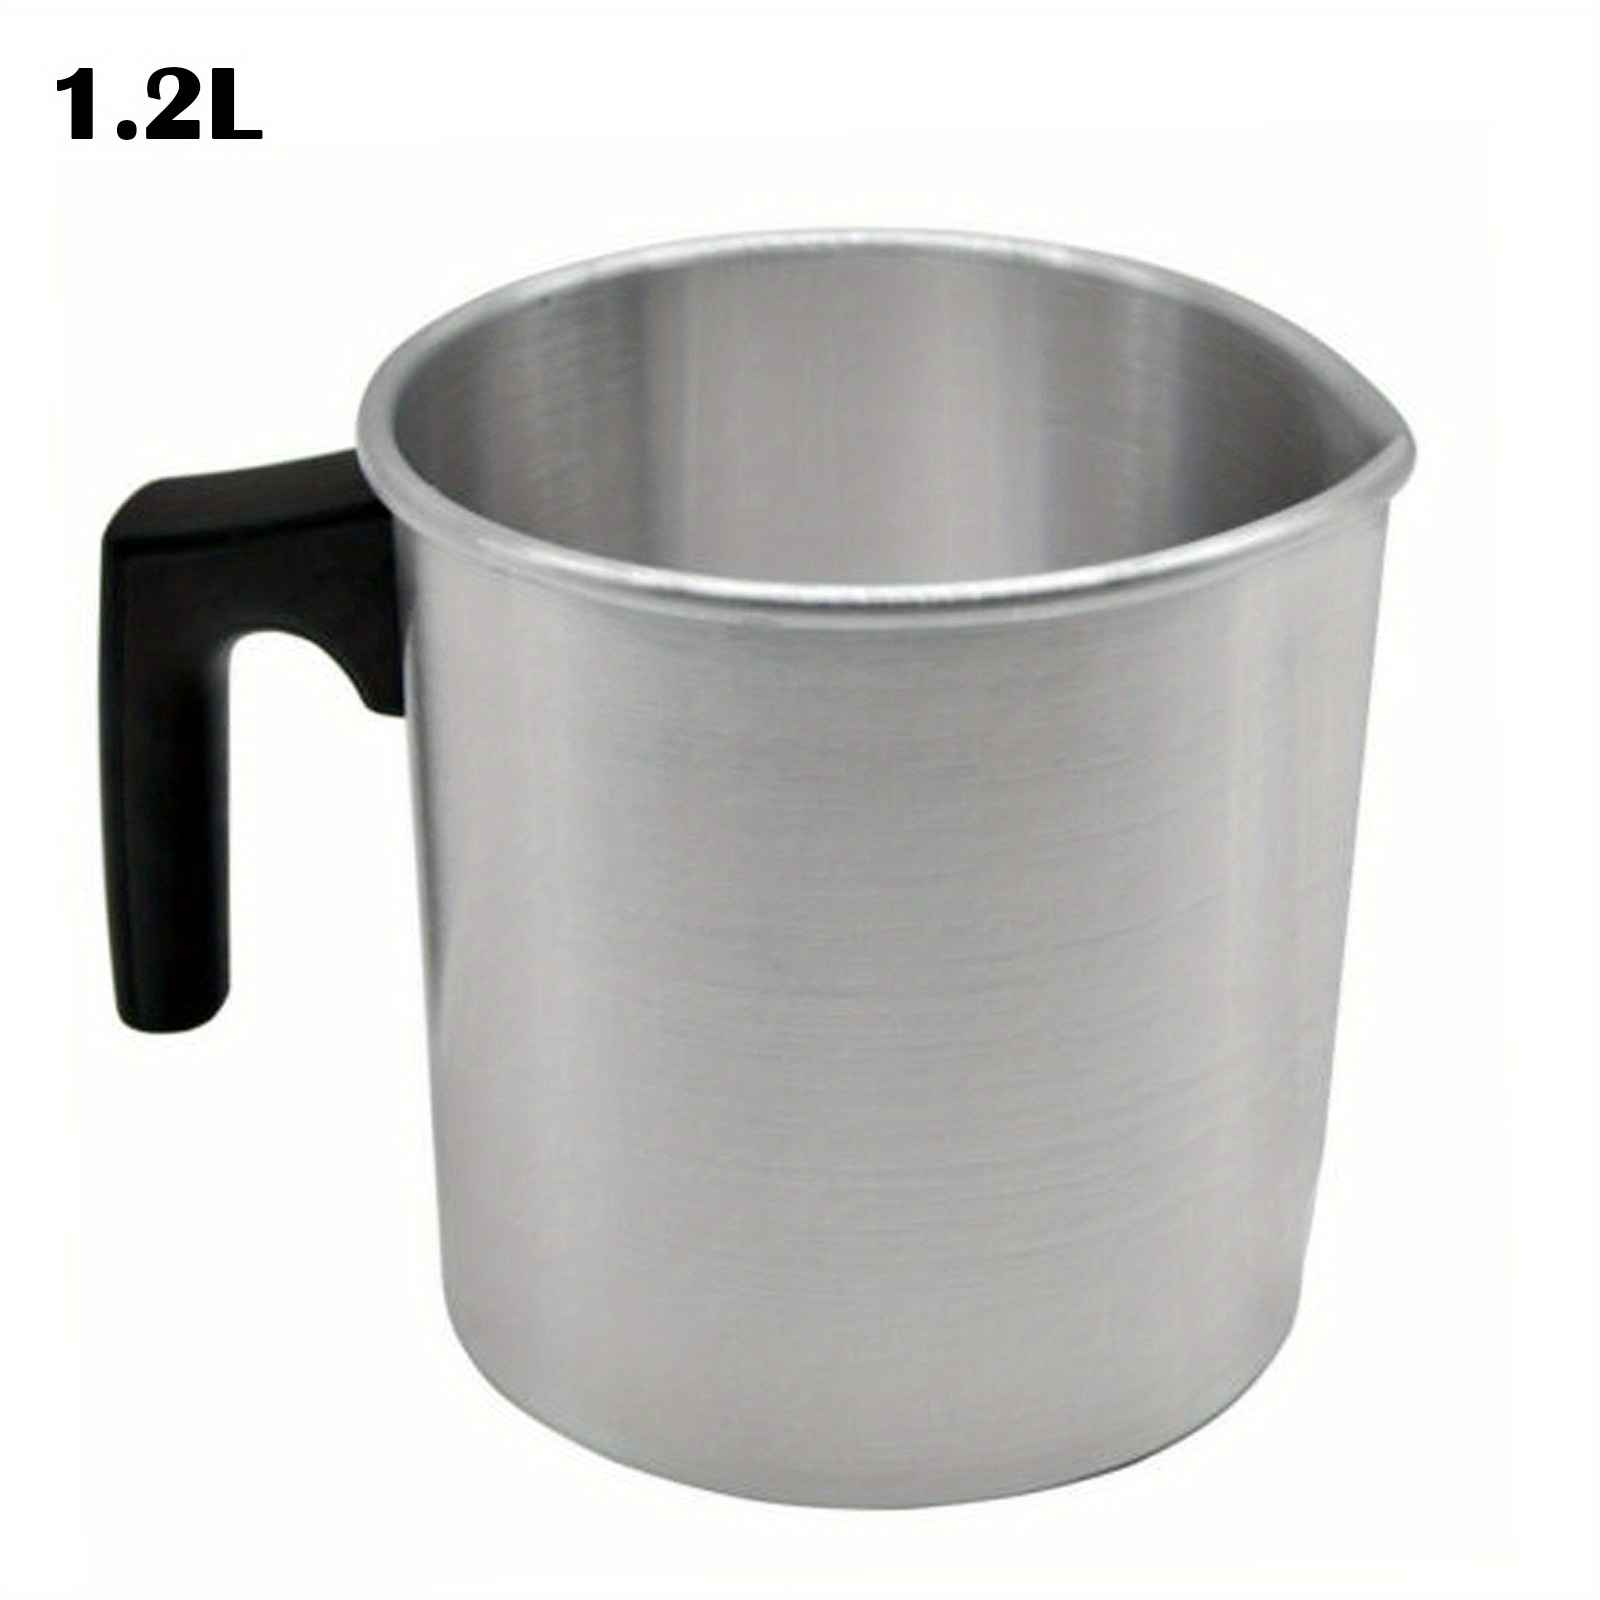 Candle Pouring Pot w/ Measurements - 2L Stainless Steel